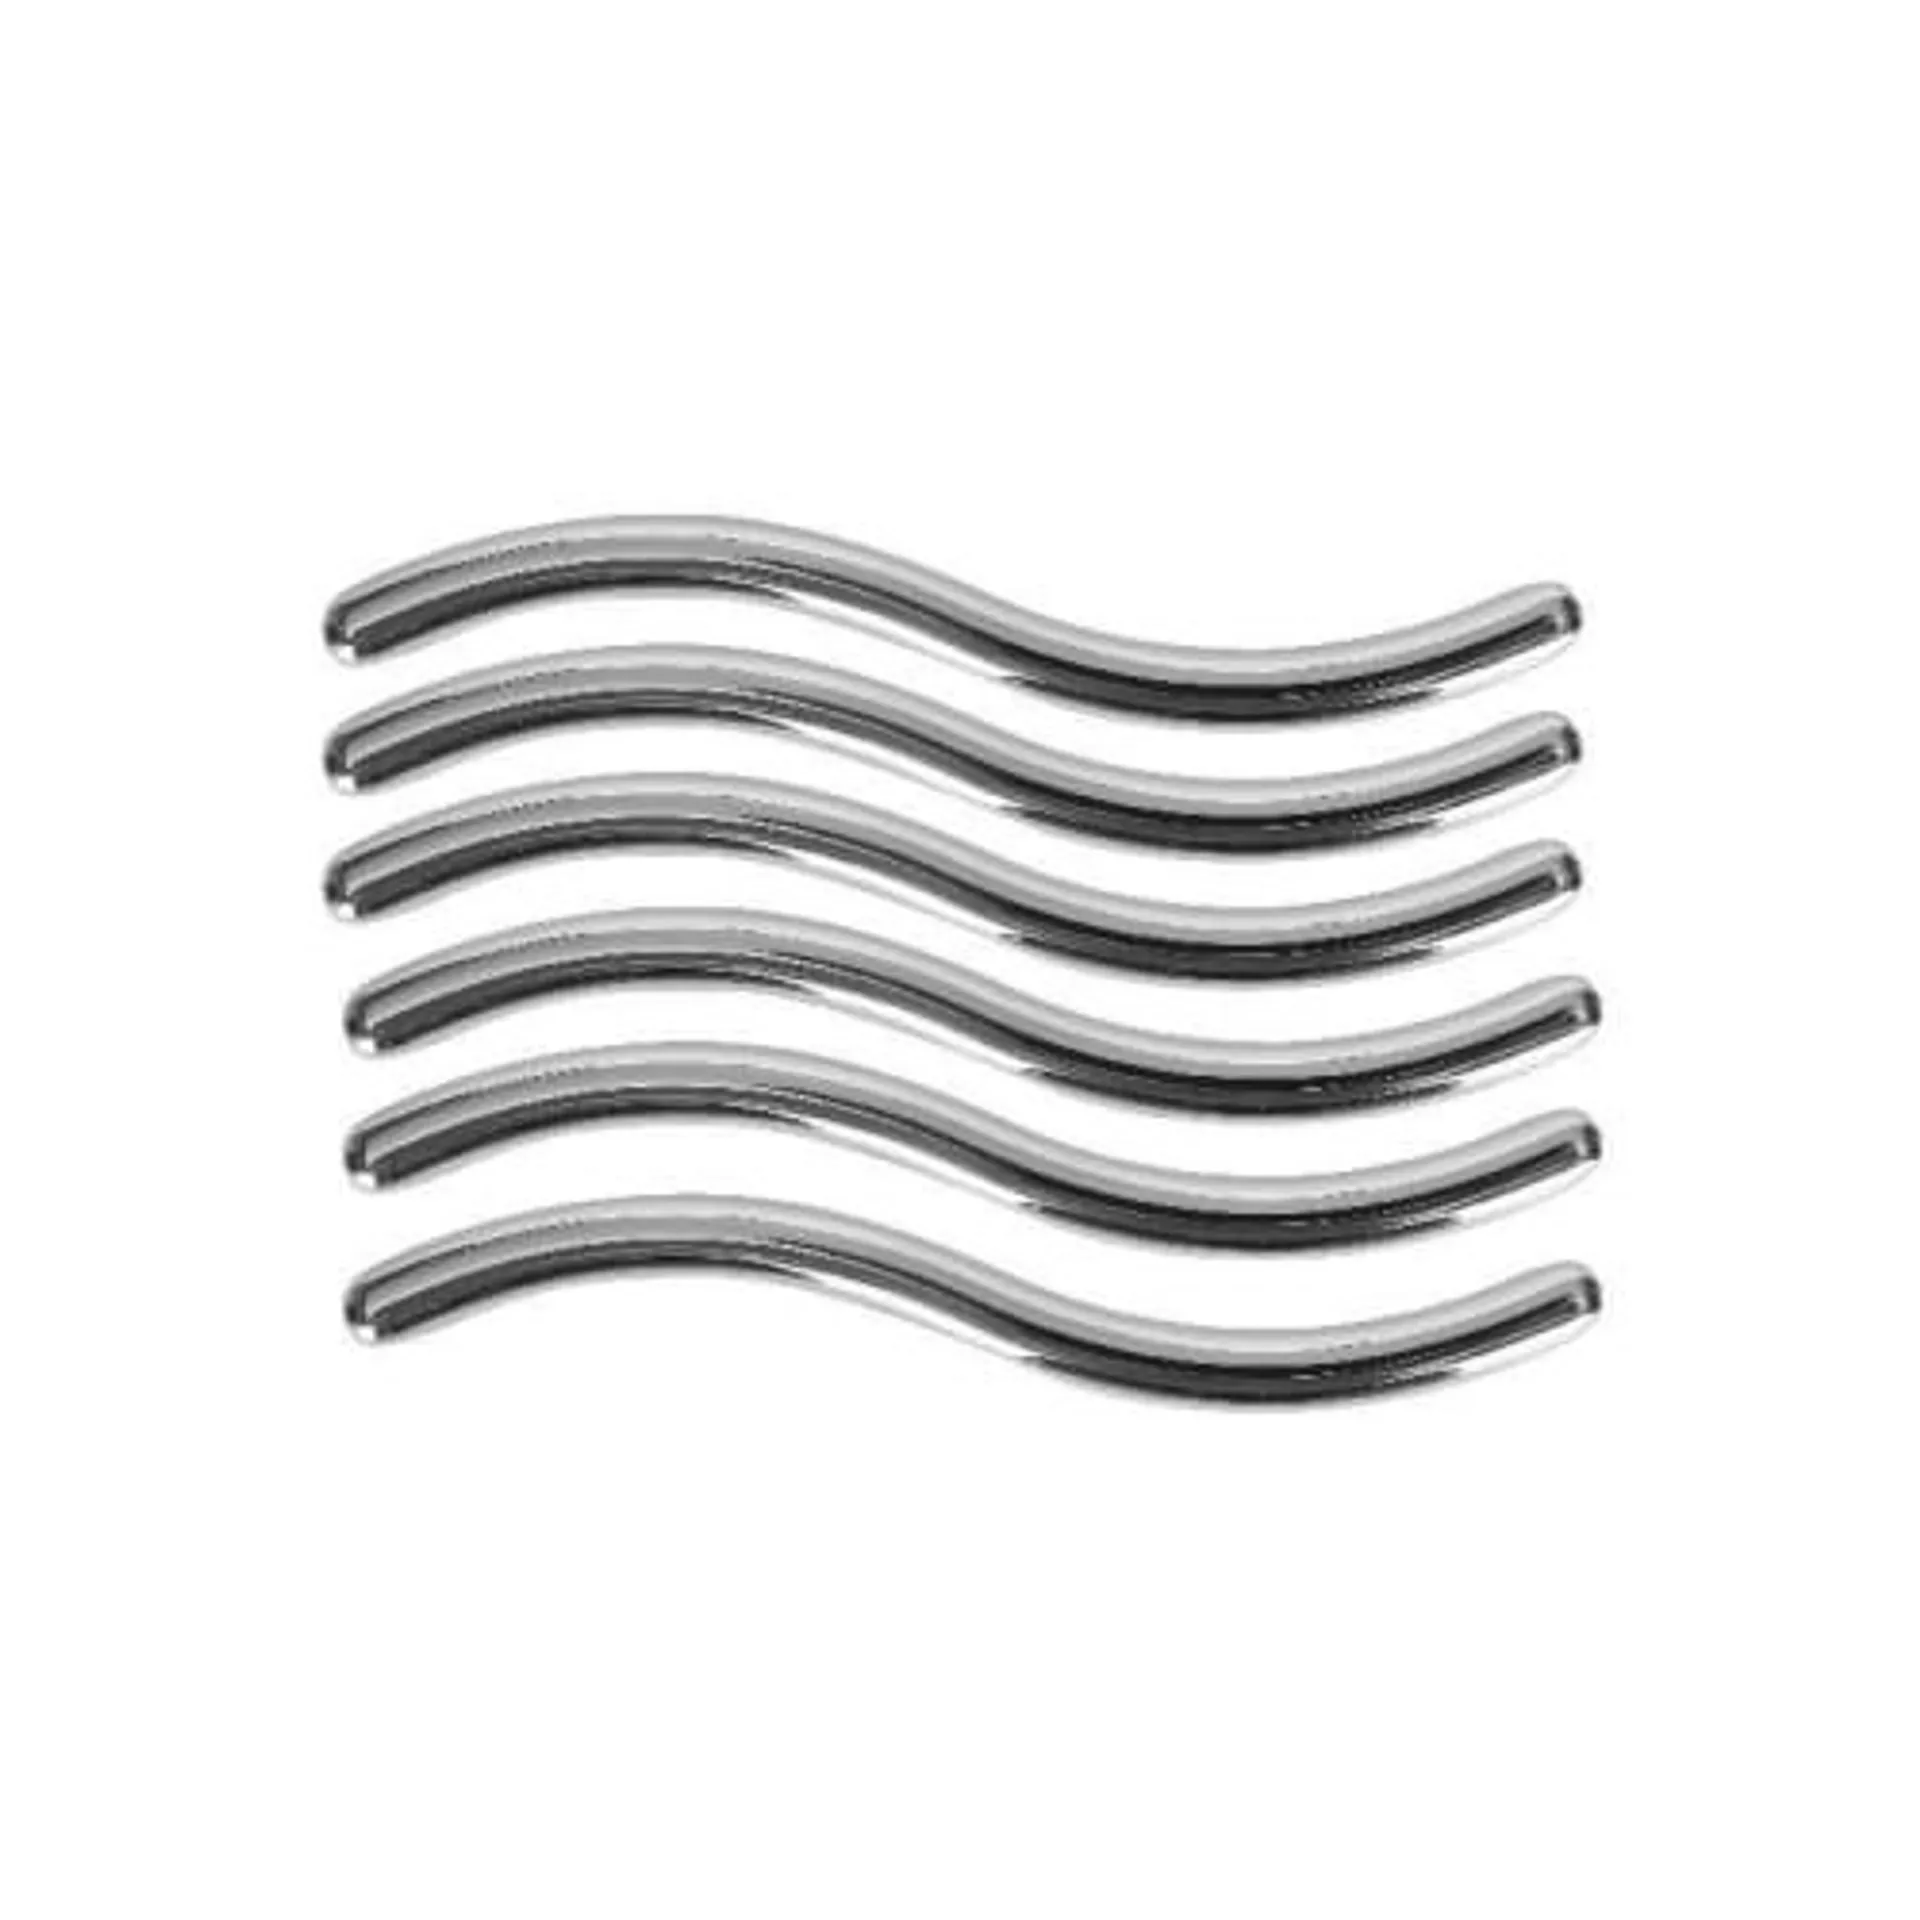 Wickes Wave Door Handle - Polished Chrome 108mm Pack of 6